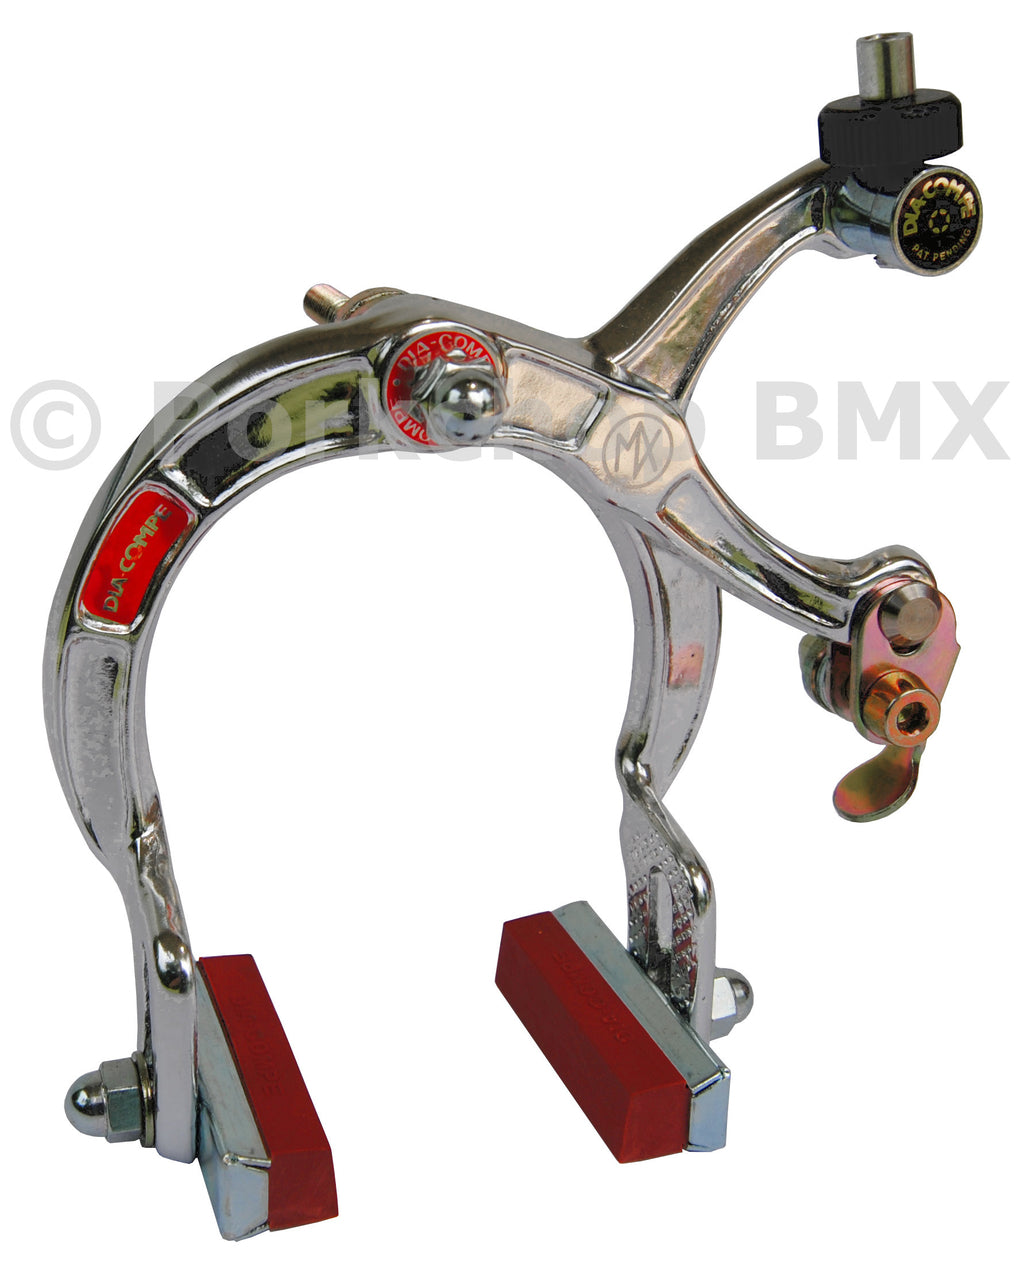 DIA-COMPE MX1000 OLD SCHOOL BMX BICYCLE BRAKE CALIPER (SOLD AS SINGLES)